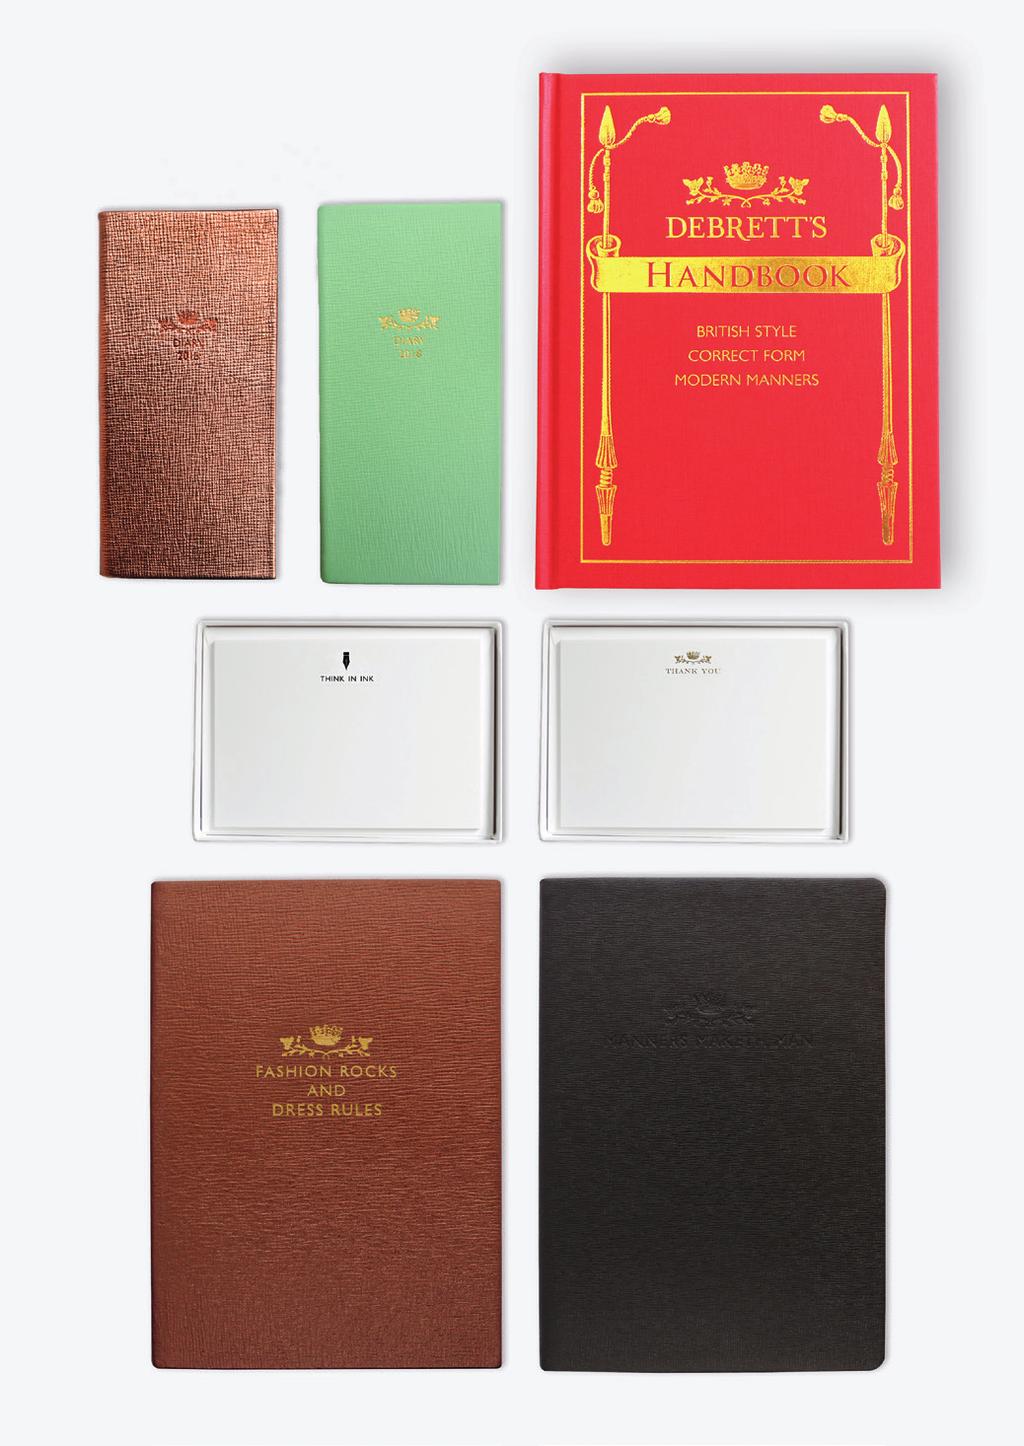 OFF-THE-SHELF ORDERS DEBRETT S 2018 COLLECTION OFF-THE-SHELF ORDERS QUANTITY 10-25 26-50 50-100 DISCOUNT 10% 15% 20% MORE THAN 100 20% + free foil stamping (subject to sight of logo) Debrett s